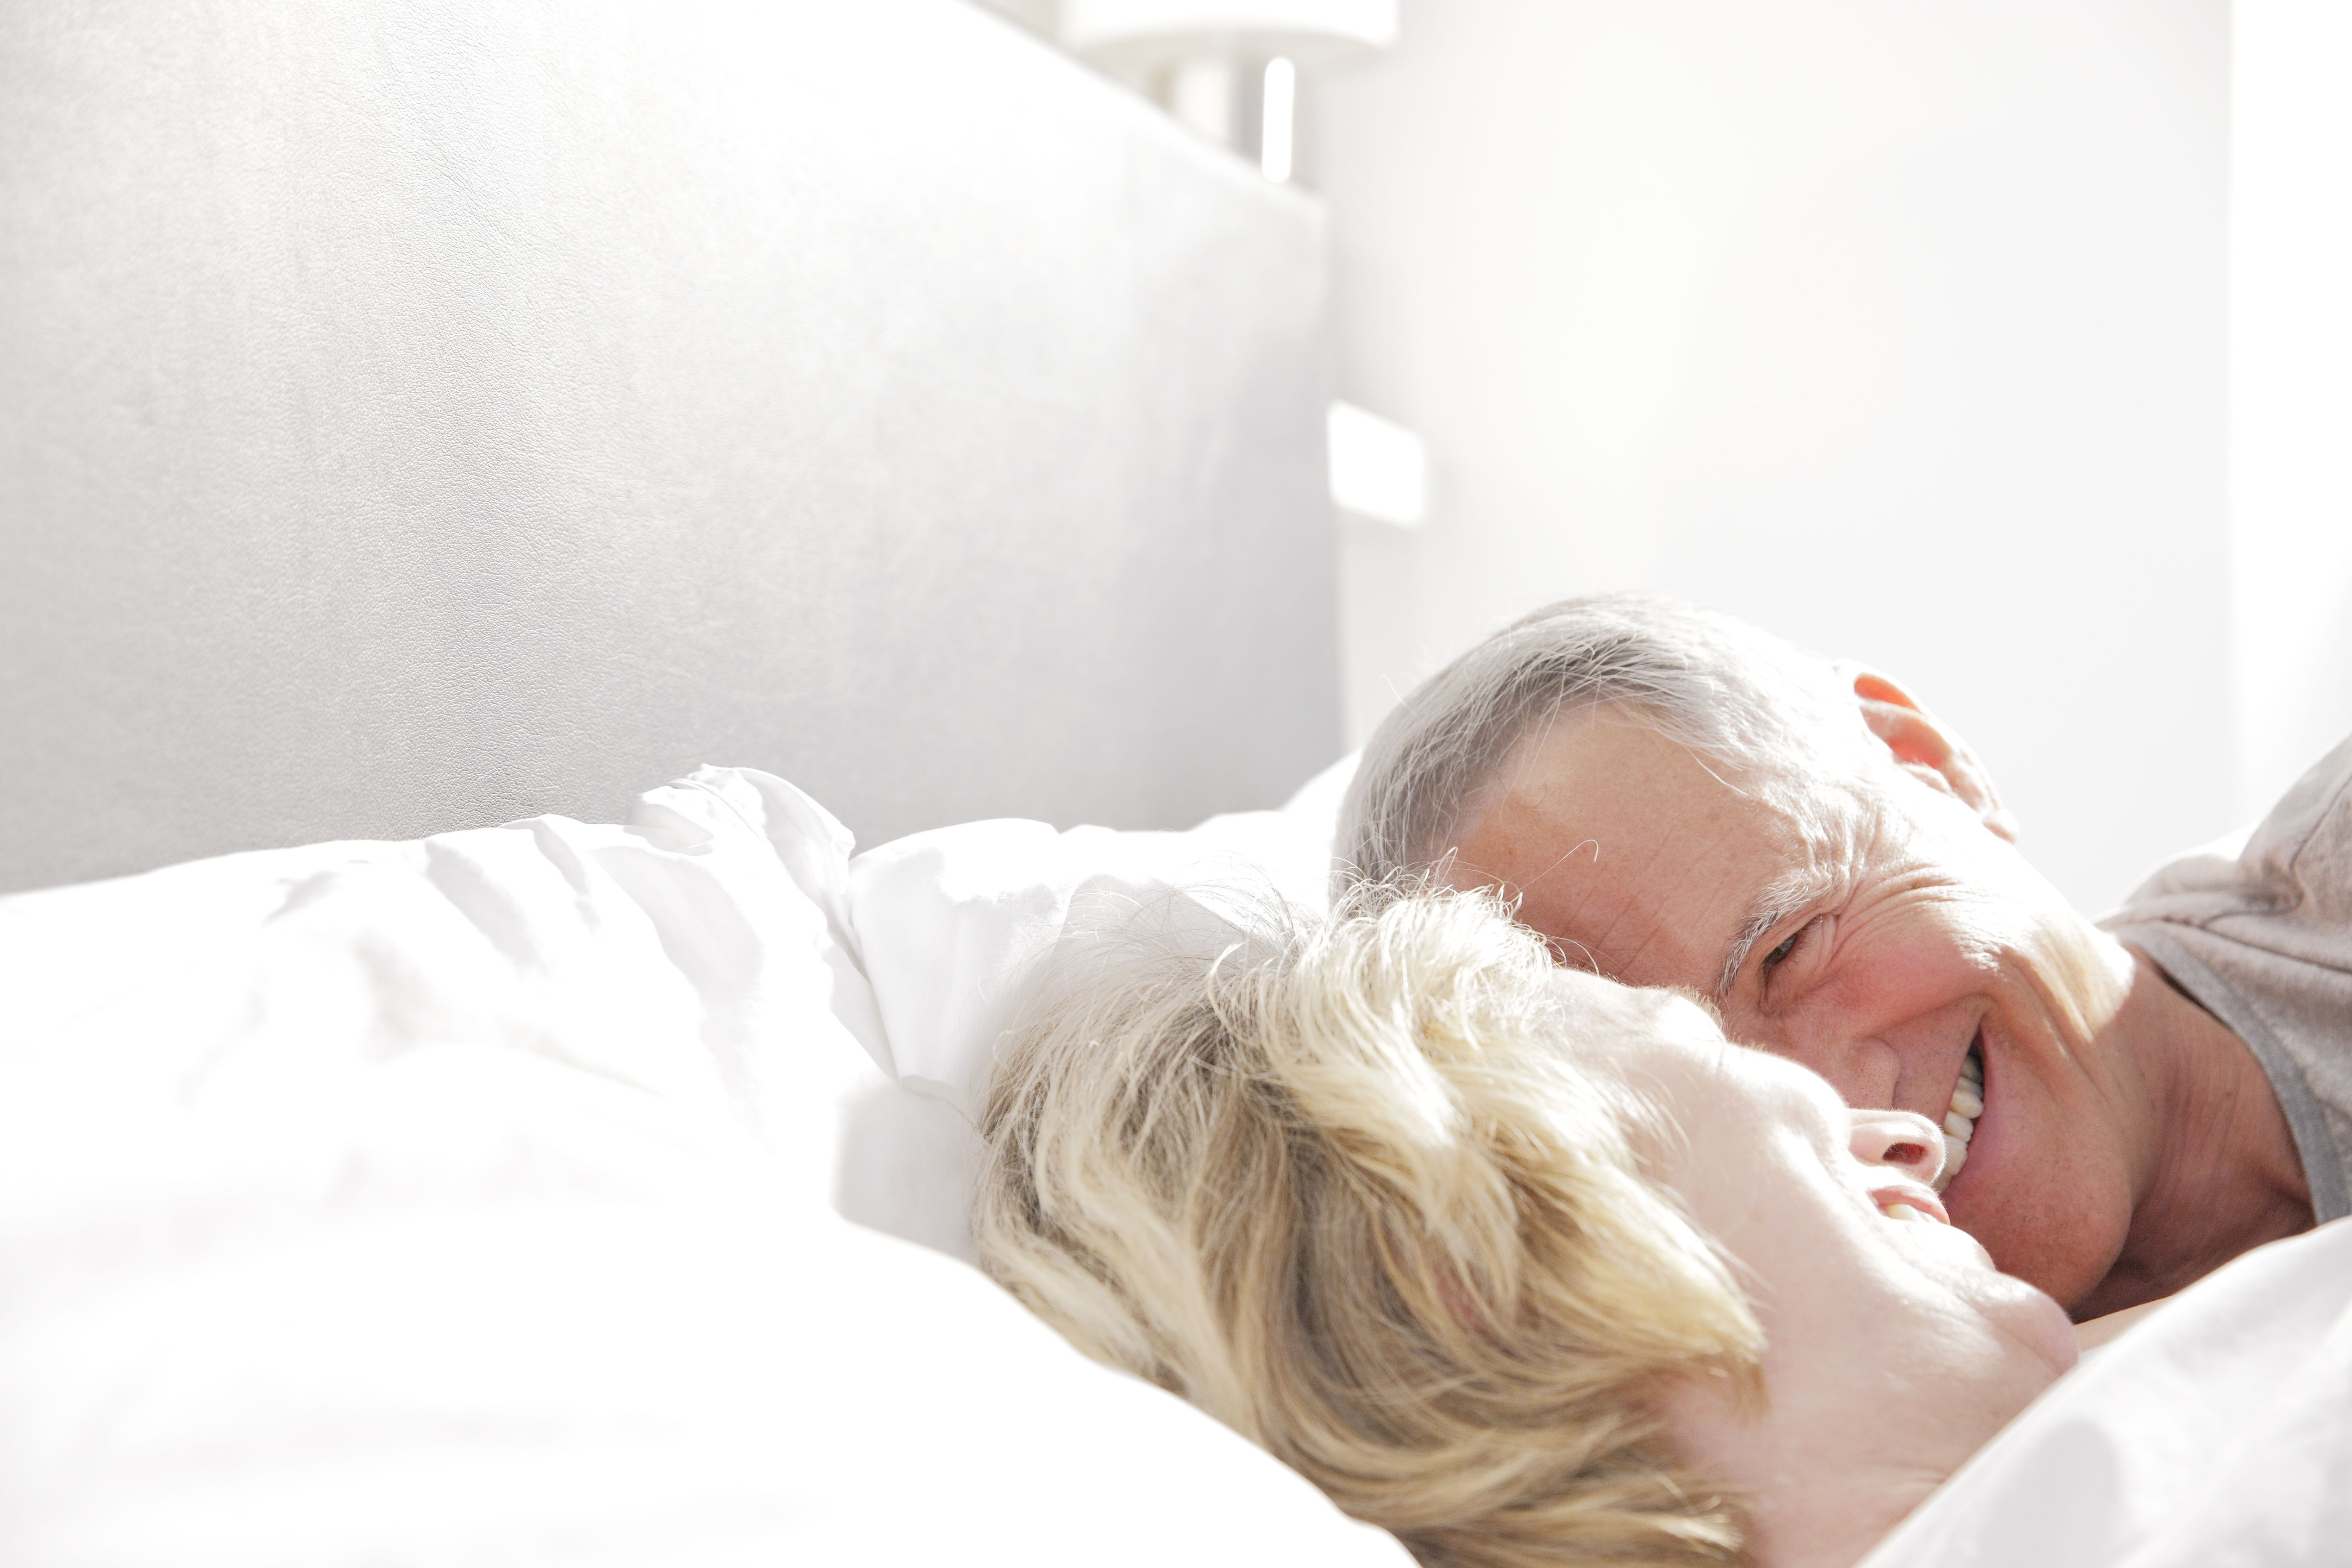 A Urologist Shared 8 Tips for Having Great Sex Over the Age of 50 pic